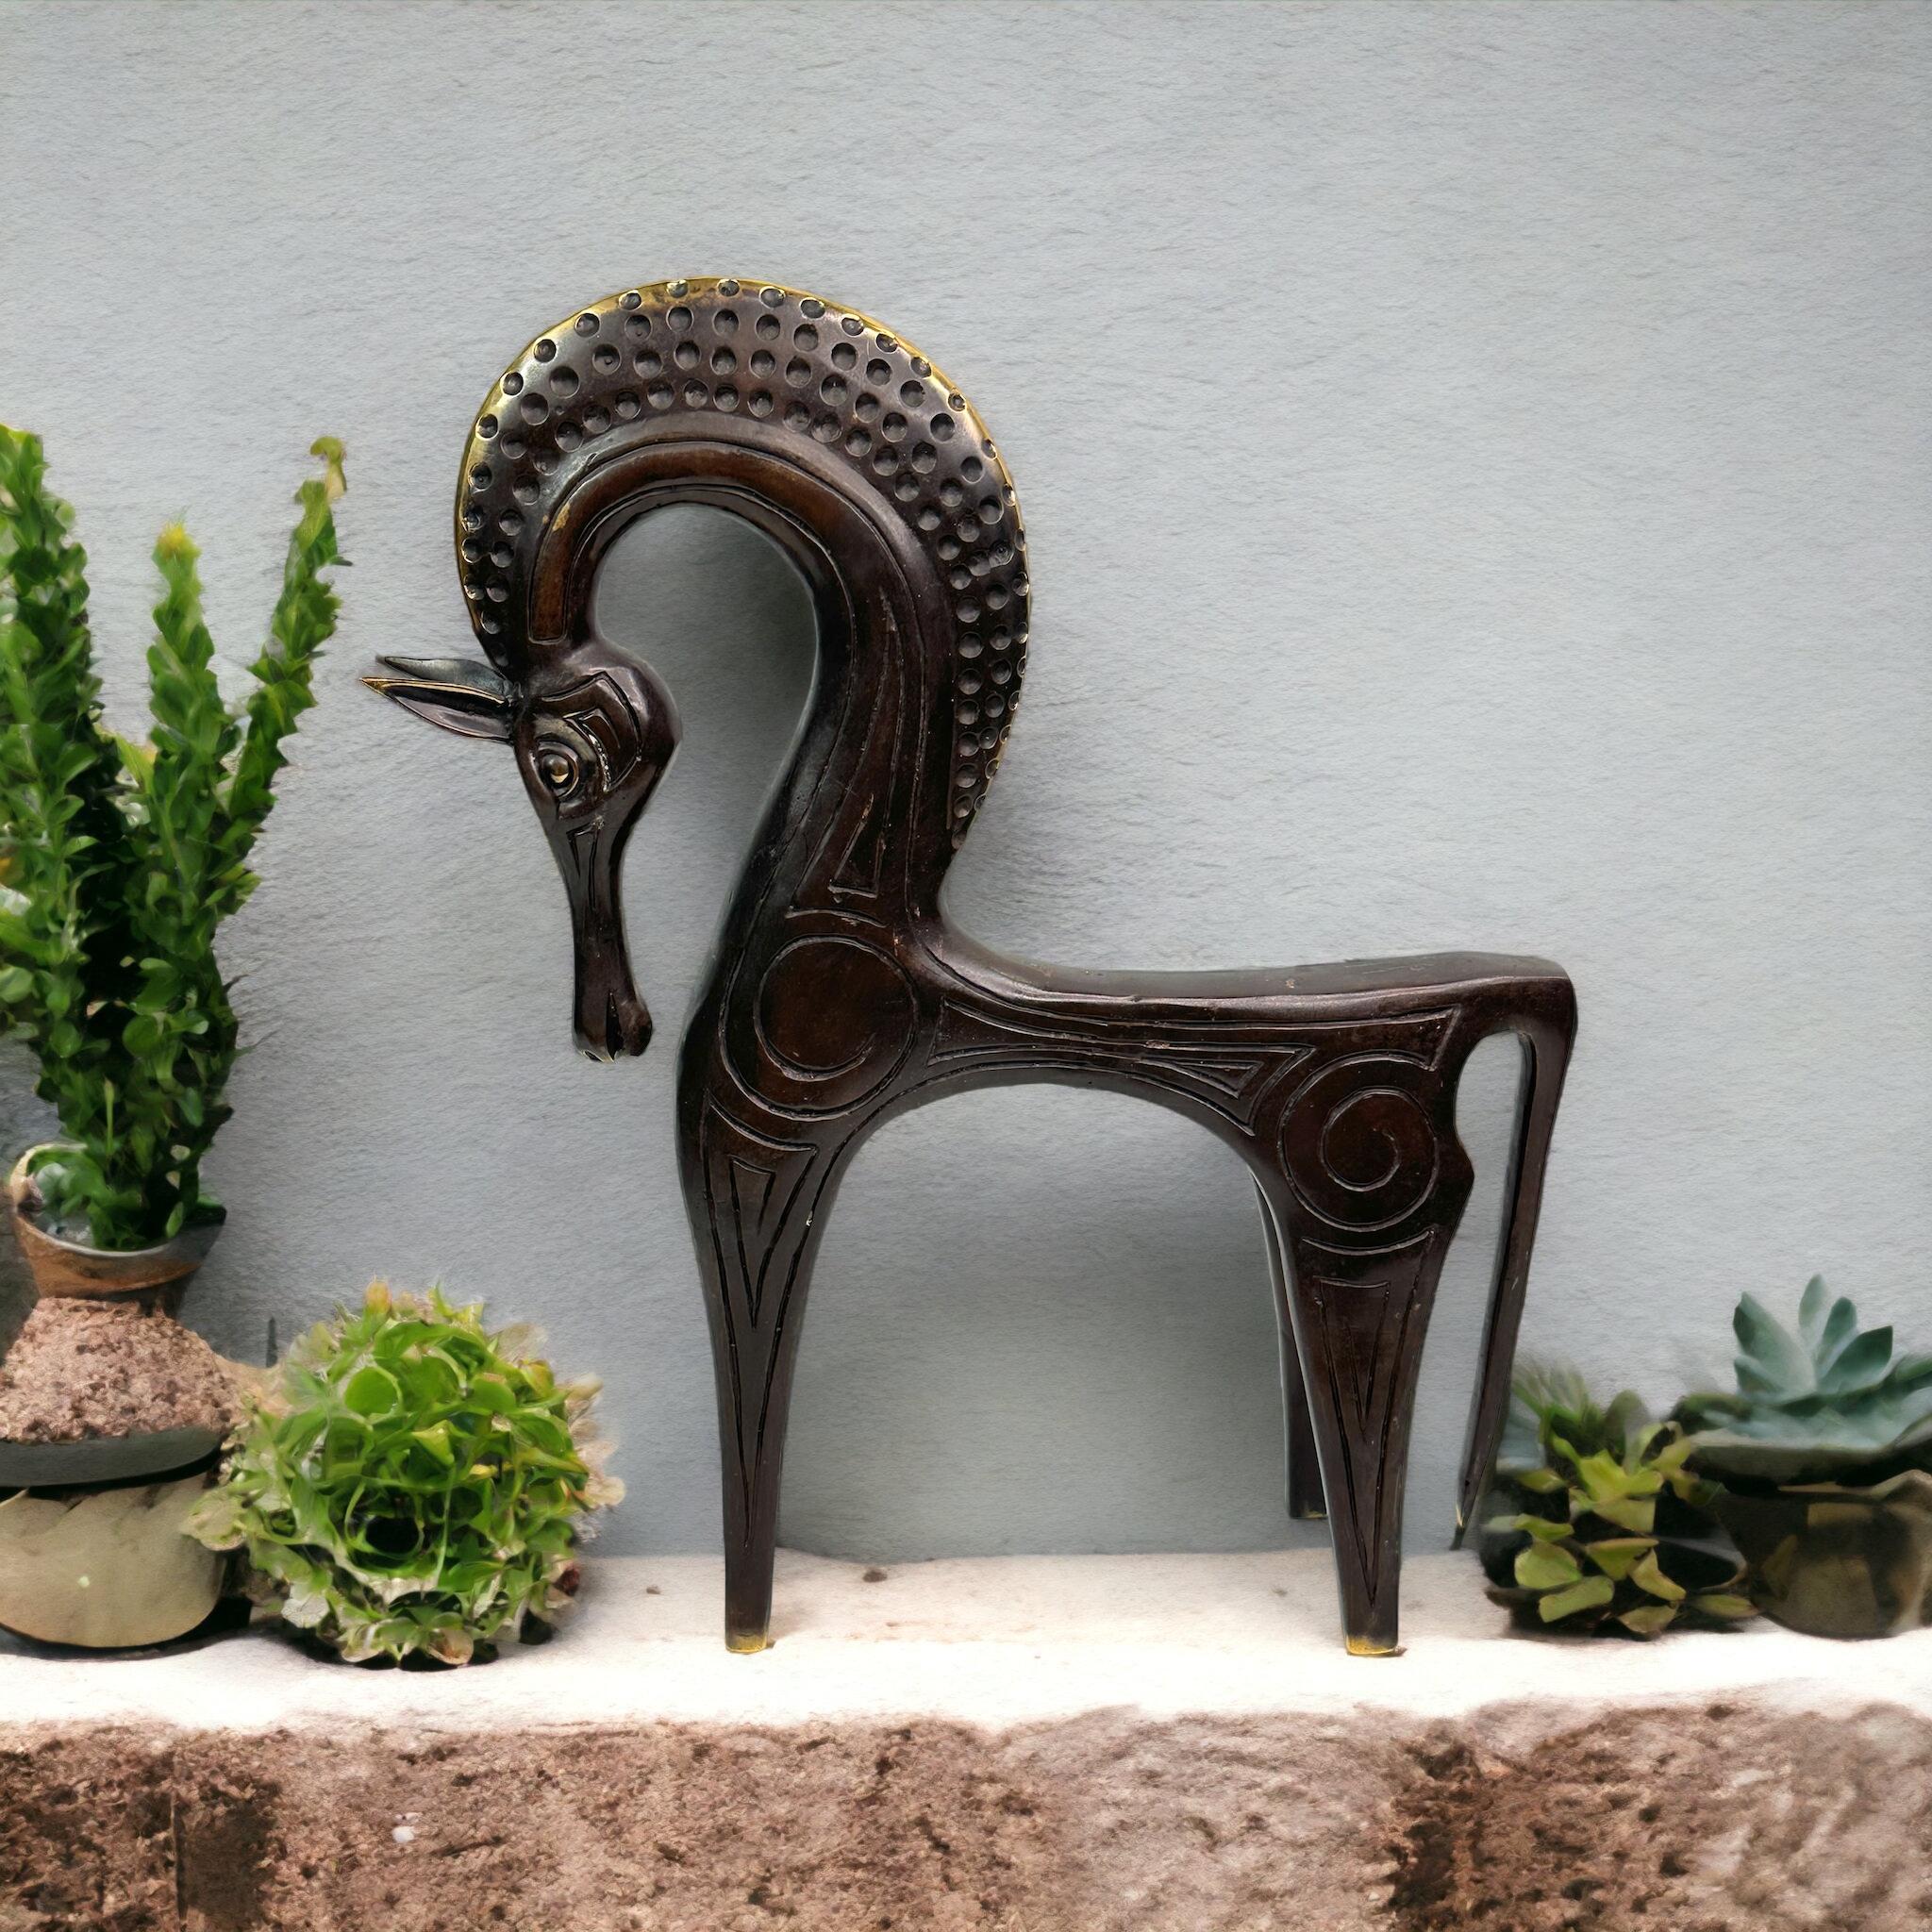 This is a bronze sculpture, in the style of the antique statues and figures of the Etruscans. It is a gorgeous interior furnishing item, an incredibly stylized Horse and has a patina finish. Greece-made and great for any Mid-Century Modern